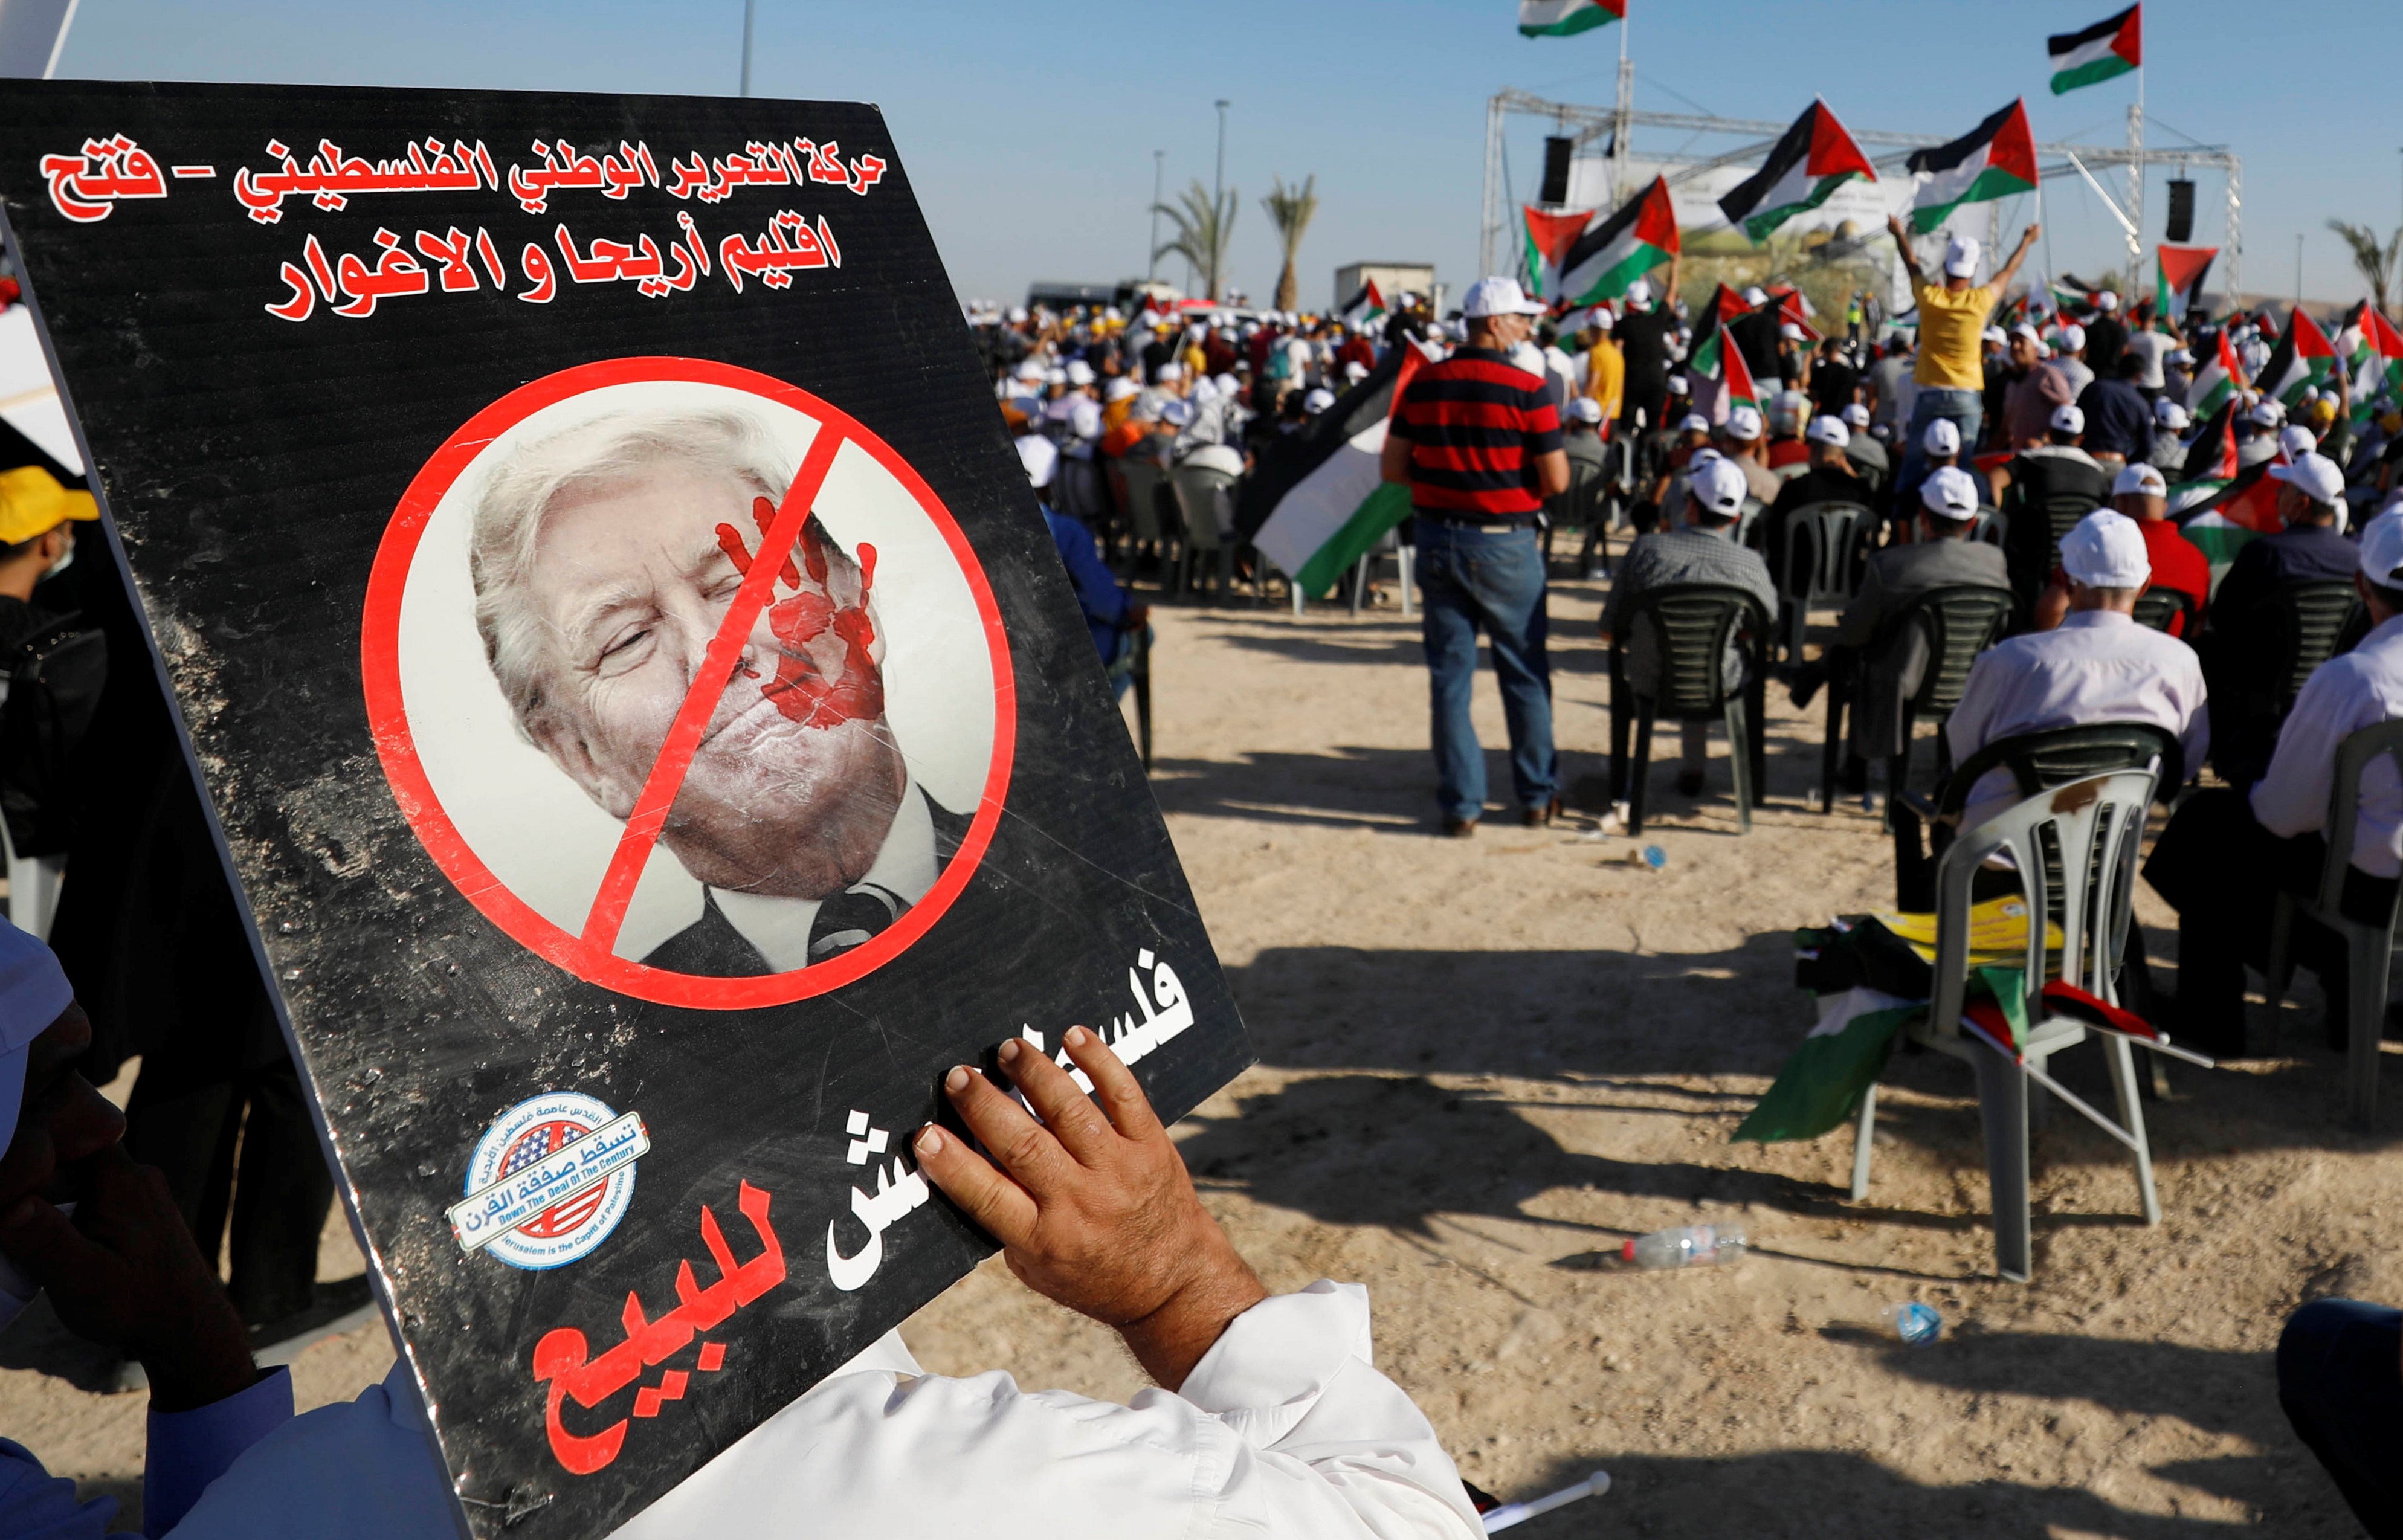  A demonstrator holds an anti-U.S. President Donald Trump placard during a rally, organised by the Palestinian Liberation Organization (PLO), to protest against Israel's plan to annex parts of the occupied West Bank, in Jericho June 22